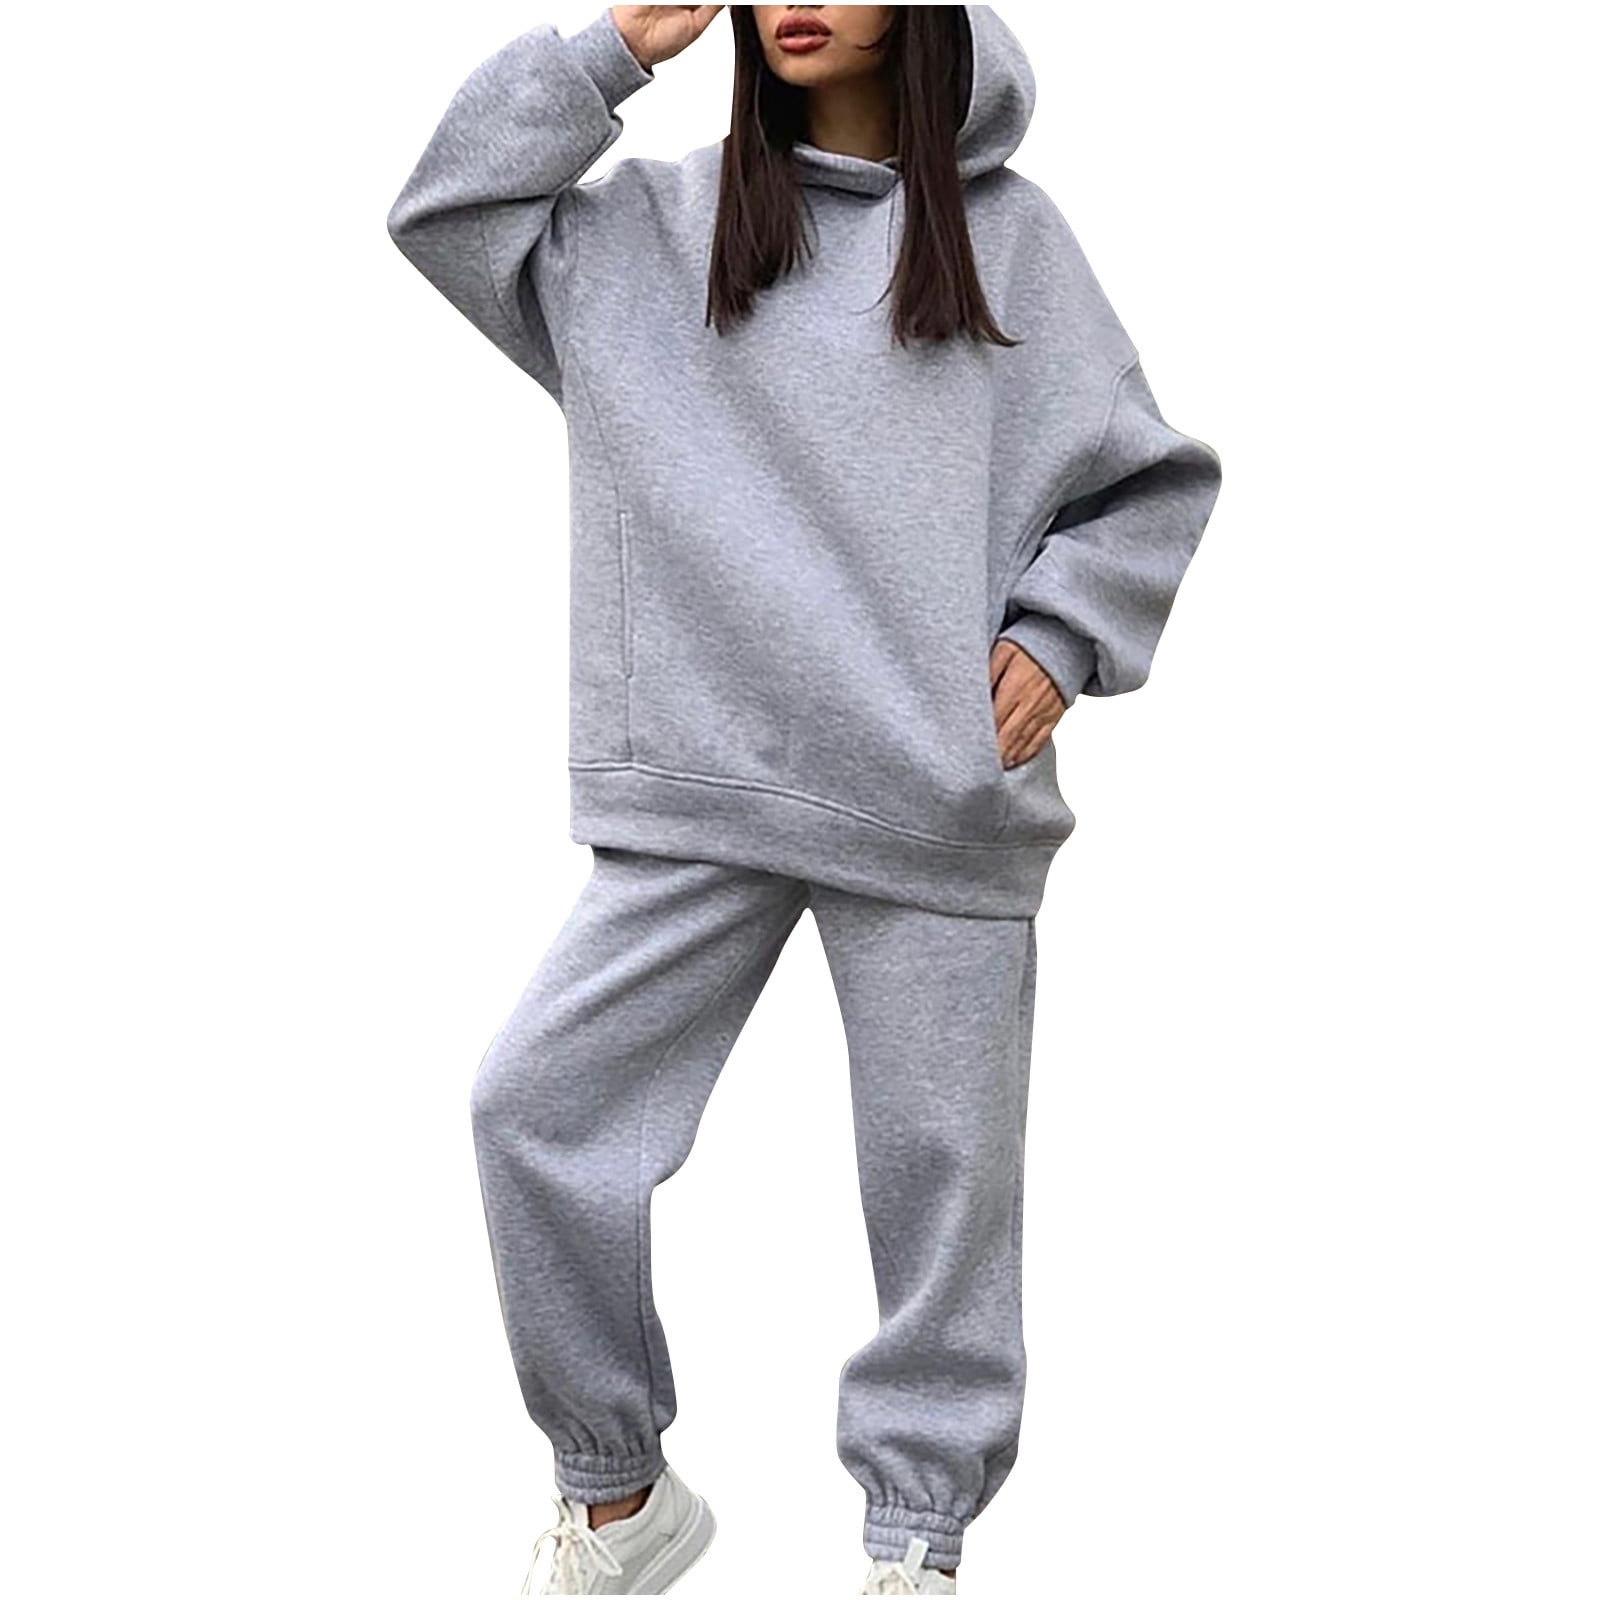 Fashion Solid 100% Cotton Sweatsuit Set For Men Two Piece Outfits Oversized  Tops And Sweatpants Jogger Tracksuits Loose Trousers